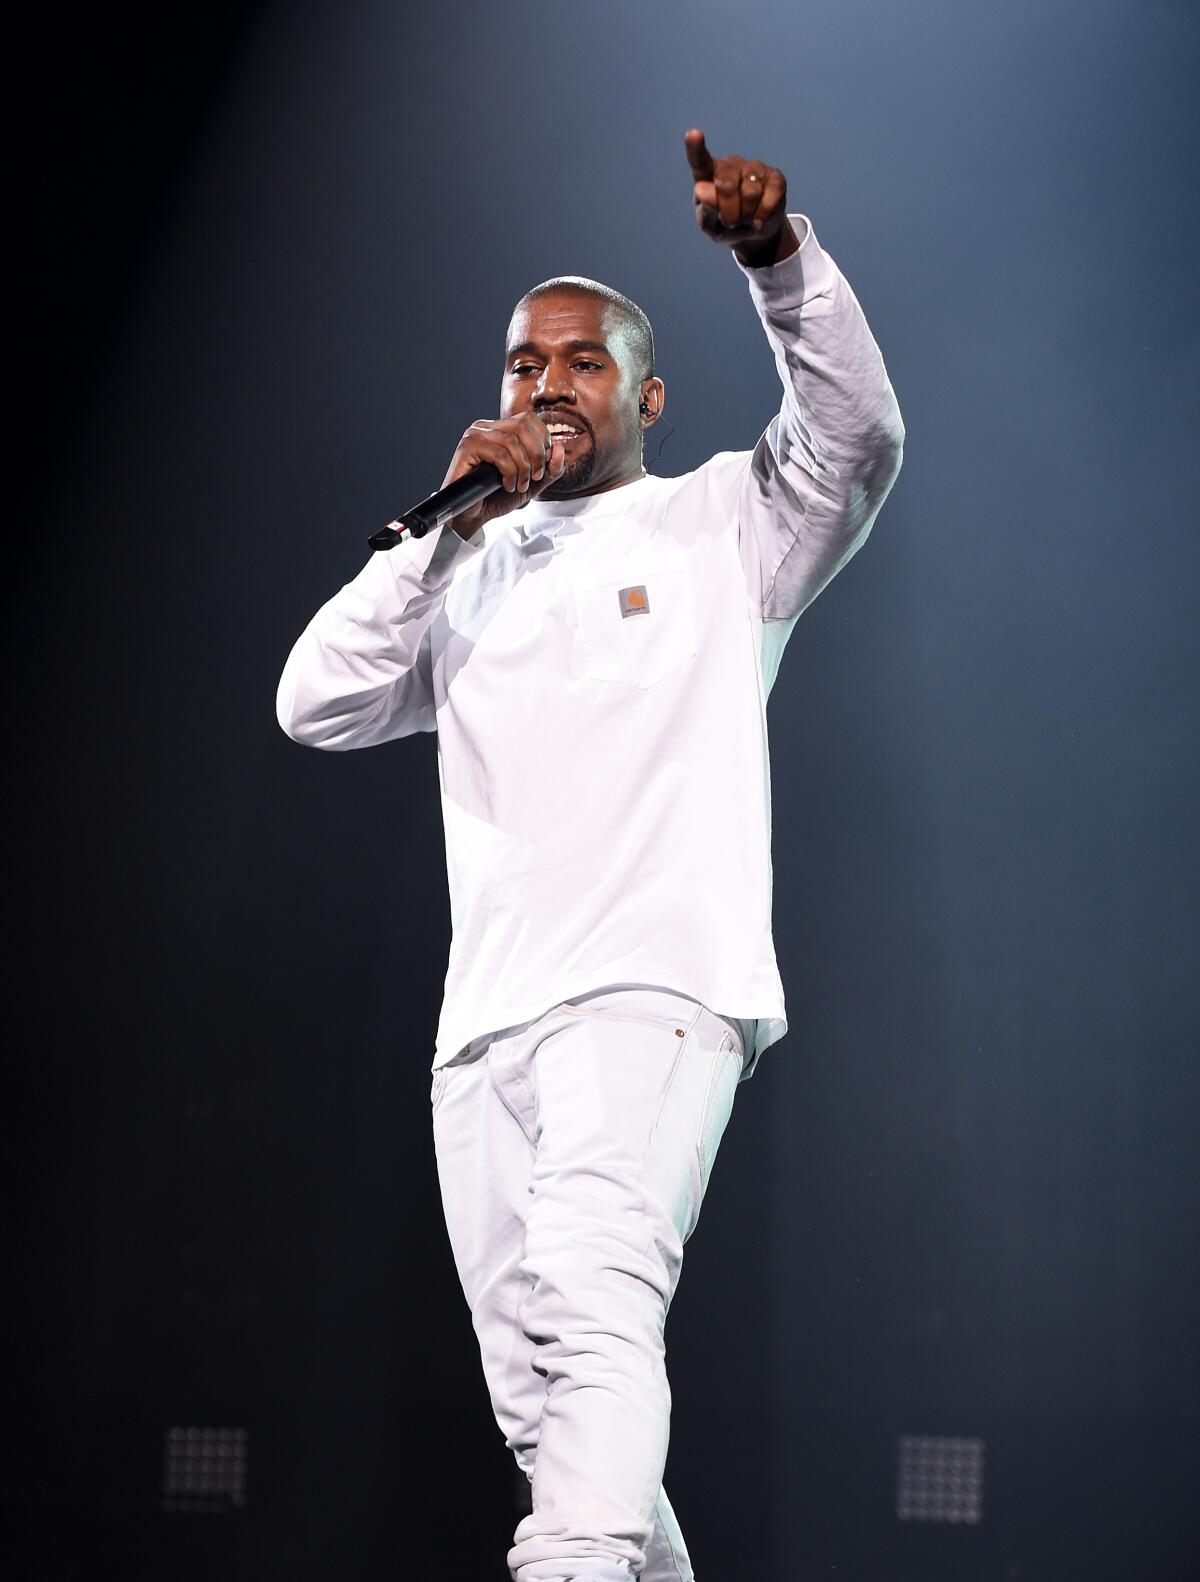 Kanye West leaned into antisemitism. Now he's playing Rolling Loud